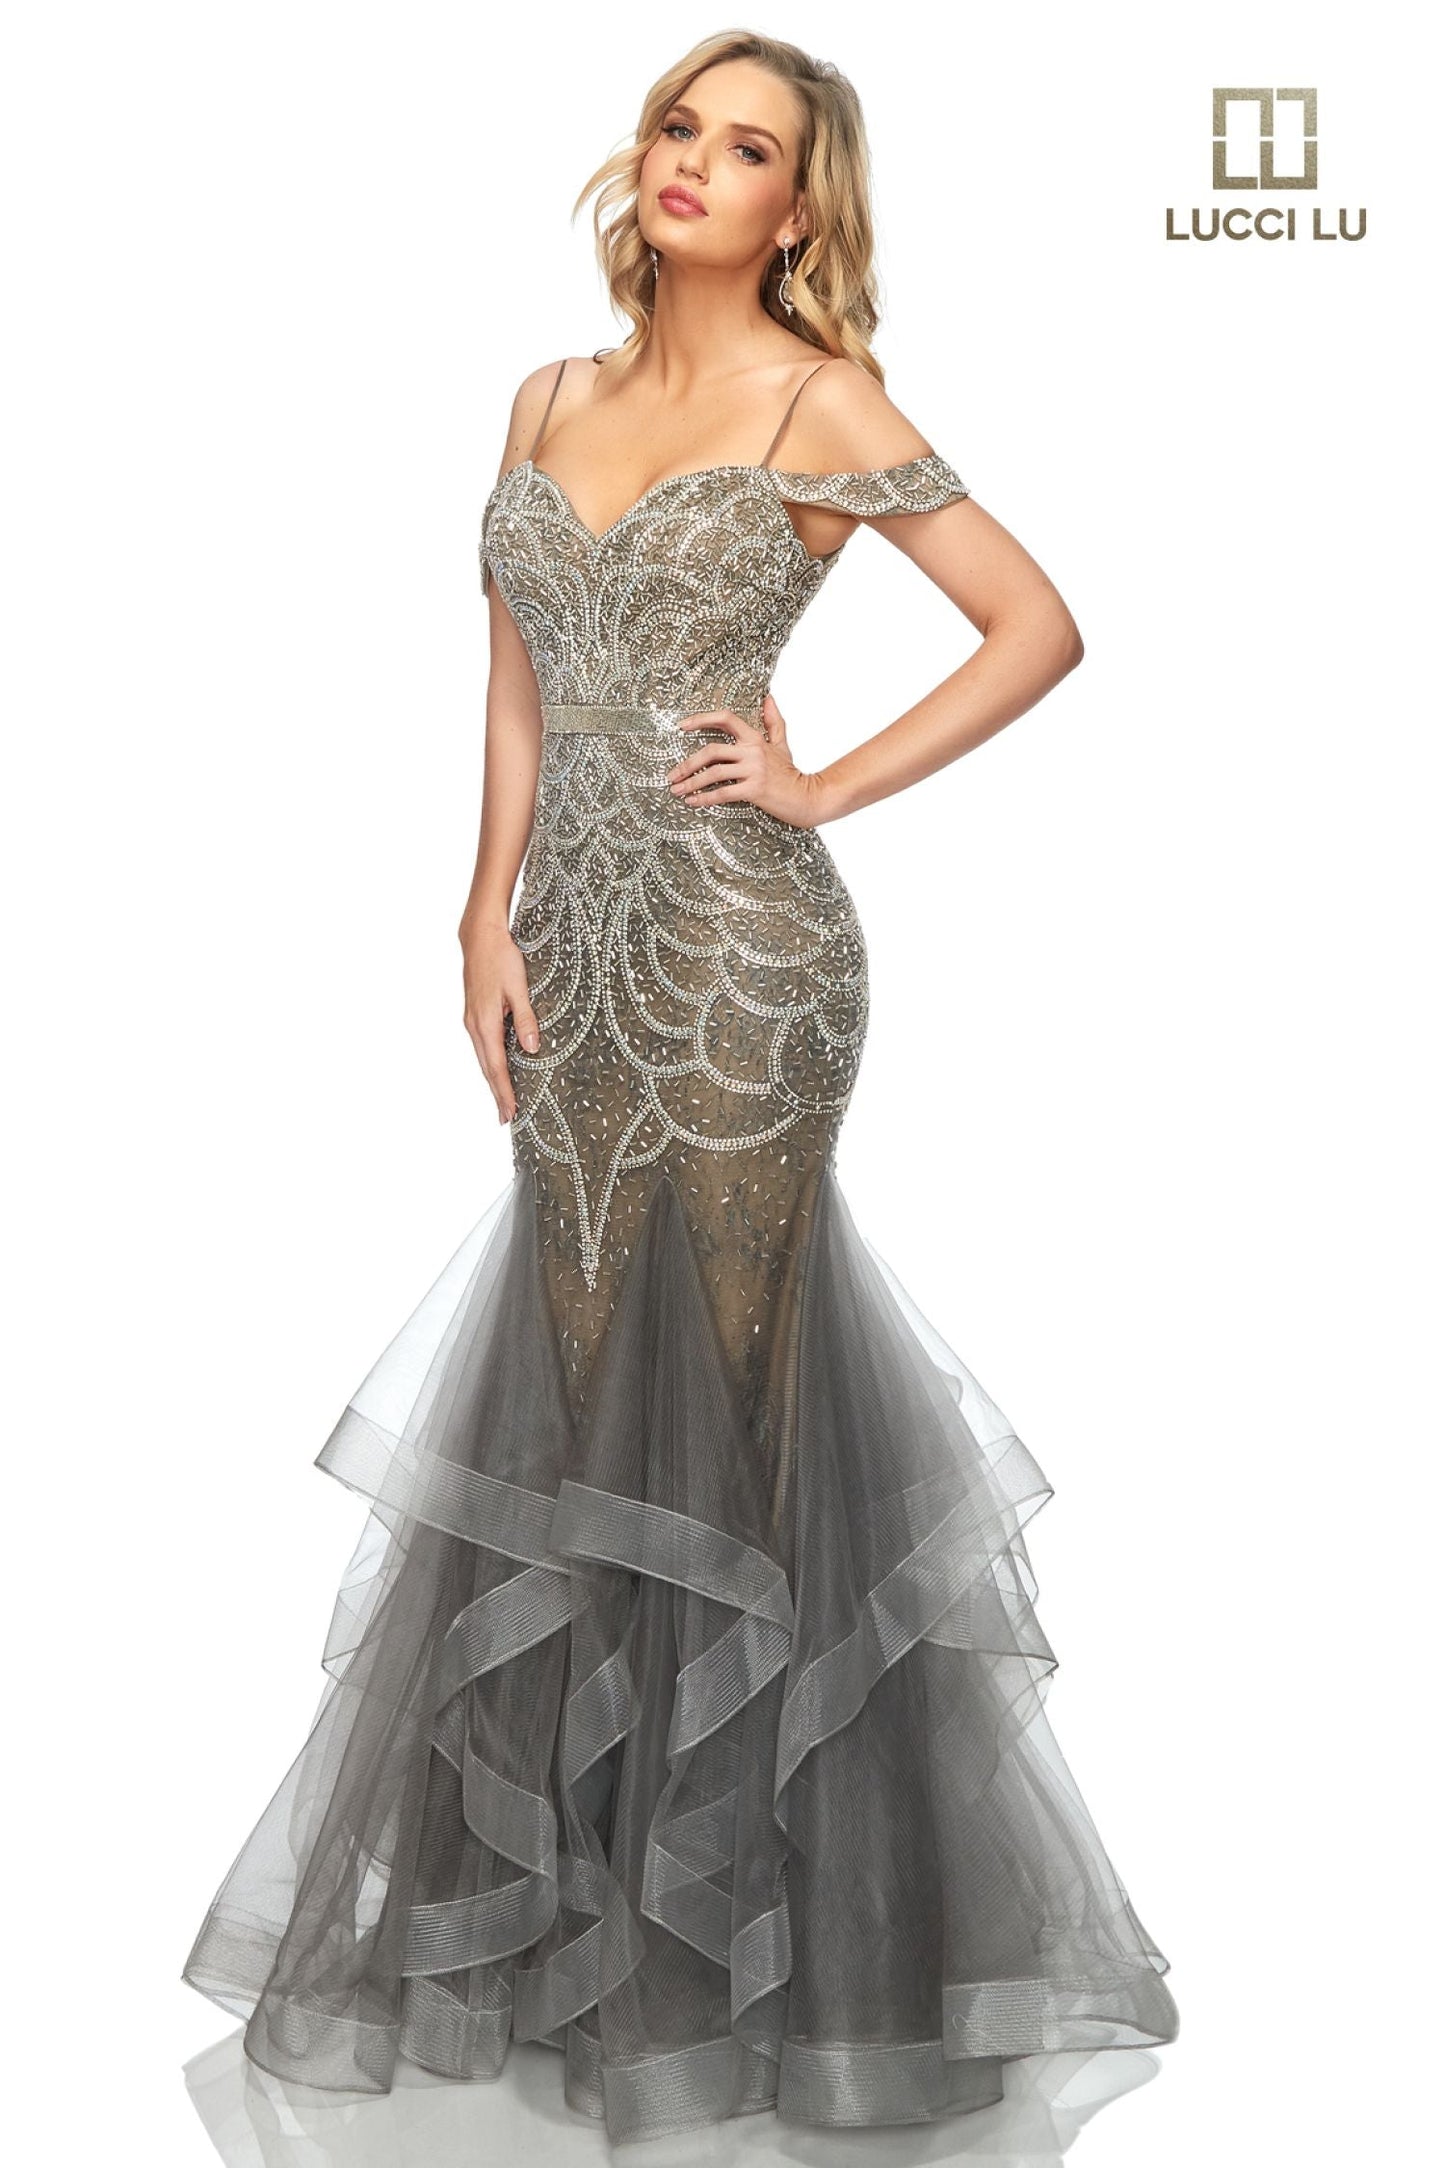 This classic Lucci Lu prom gown encapsulates sophistication and elegance with its beaded sequin-encrusted mermaid silhouette and cascading multi-layered ruffle skirt. Offering a secure fit with a secure off-the-shoulder neckline, 2147 is the perfect choice for luxurious evening events. Liquid beaded waist v neckline  Sizes:  0-16  Colors: Champagne, Dusty Blue, Dusty Rose, Gunmetal, Platinum/Gunmetal, Rose Gold